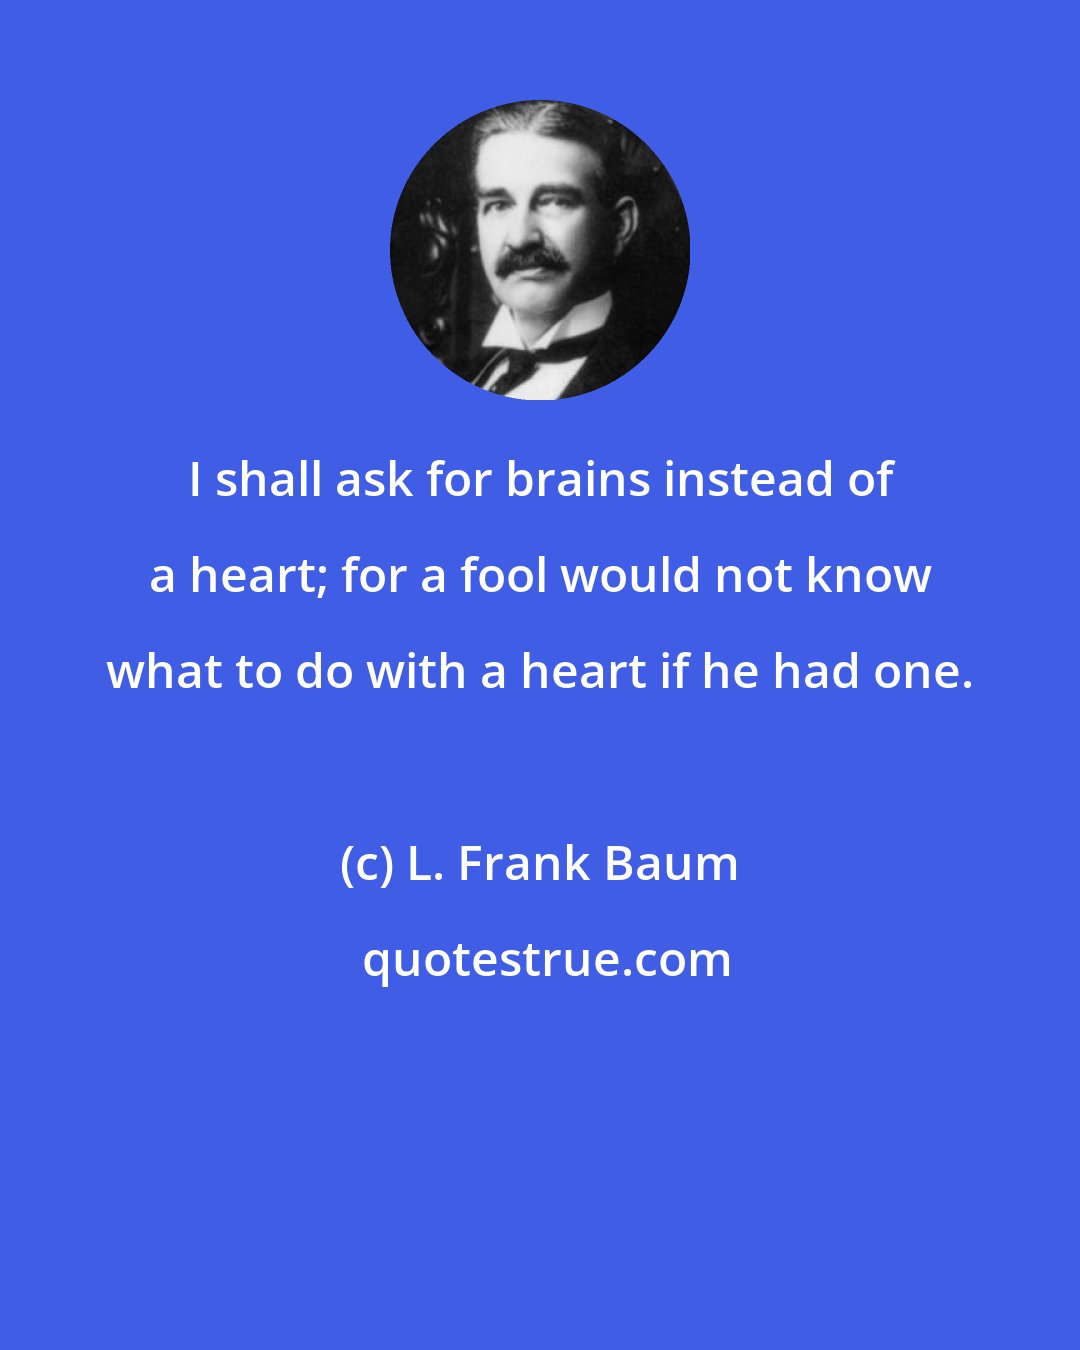 L. Frank Baum: I shall ask for brains instead of a heart; for a fool would not know what to do with a heart if he had one.